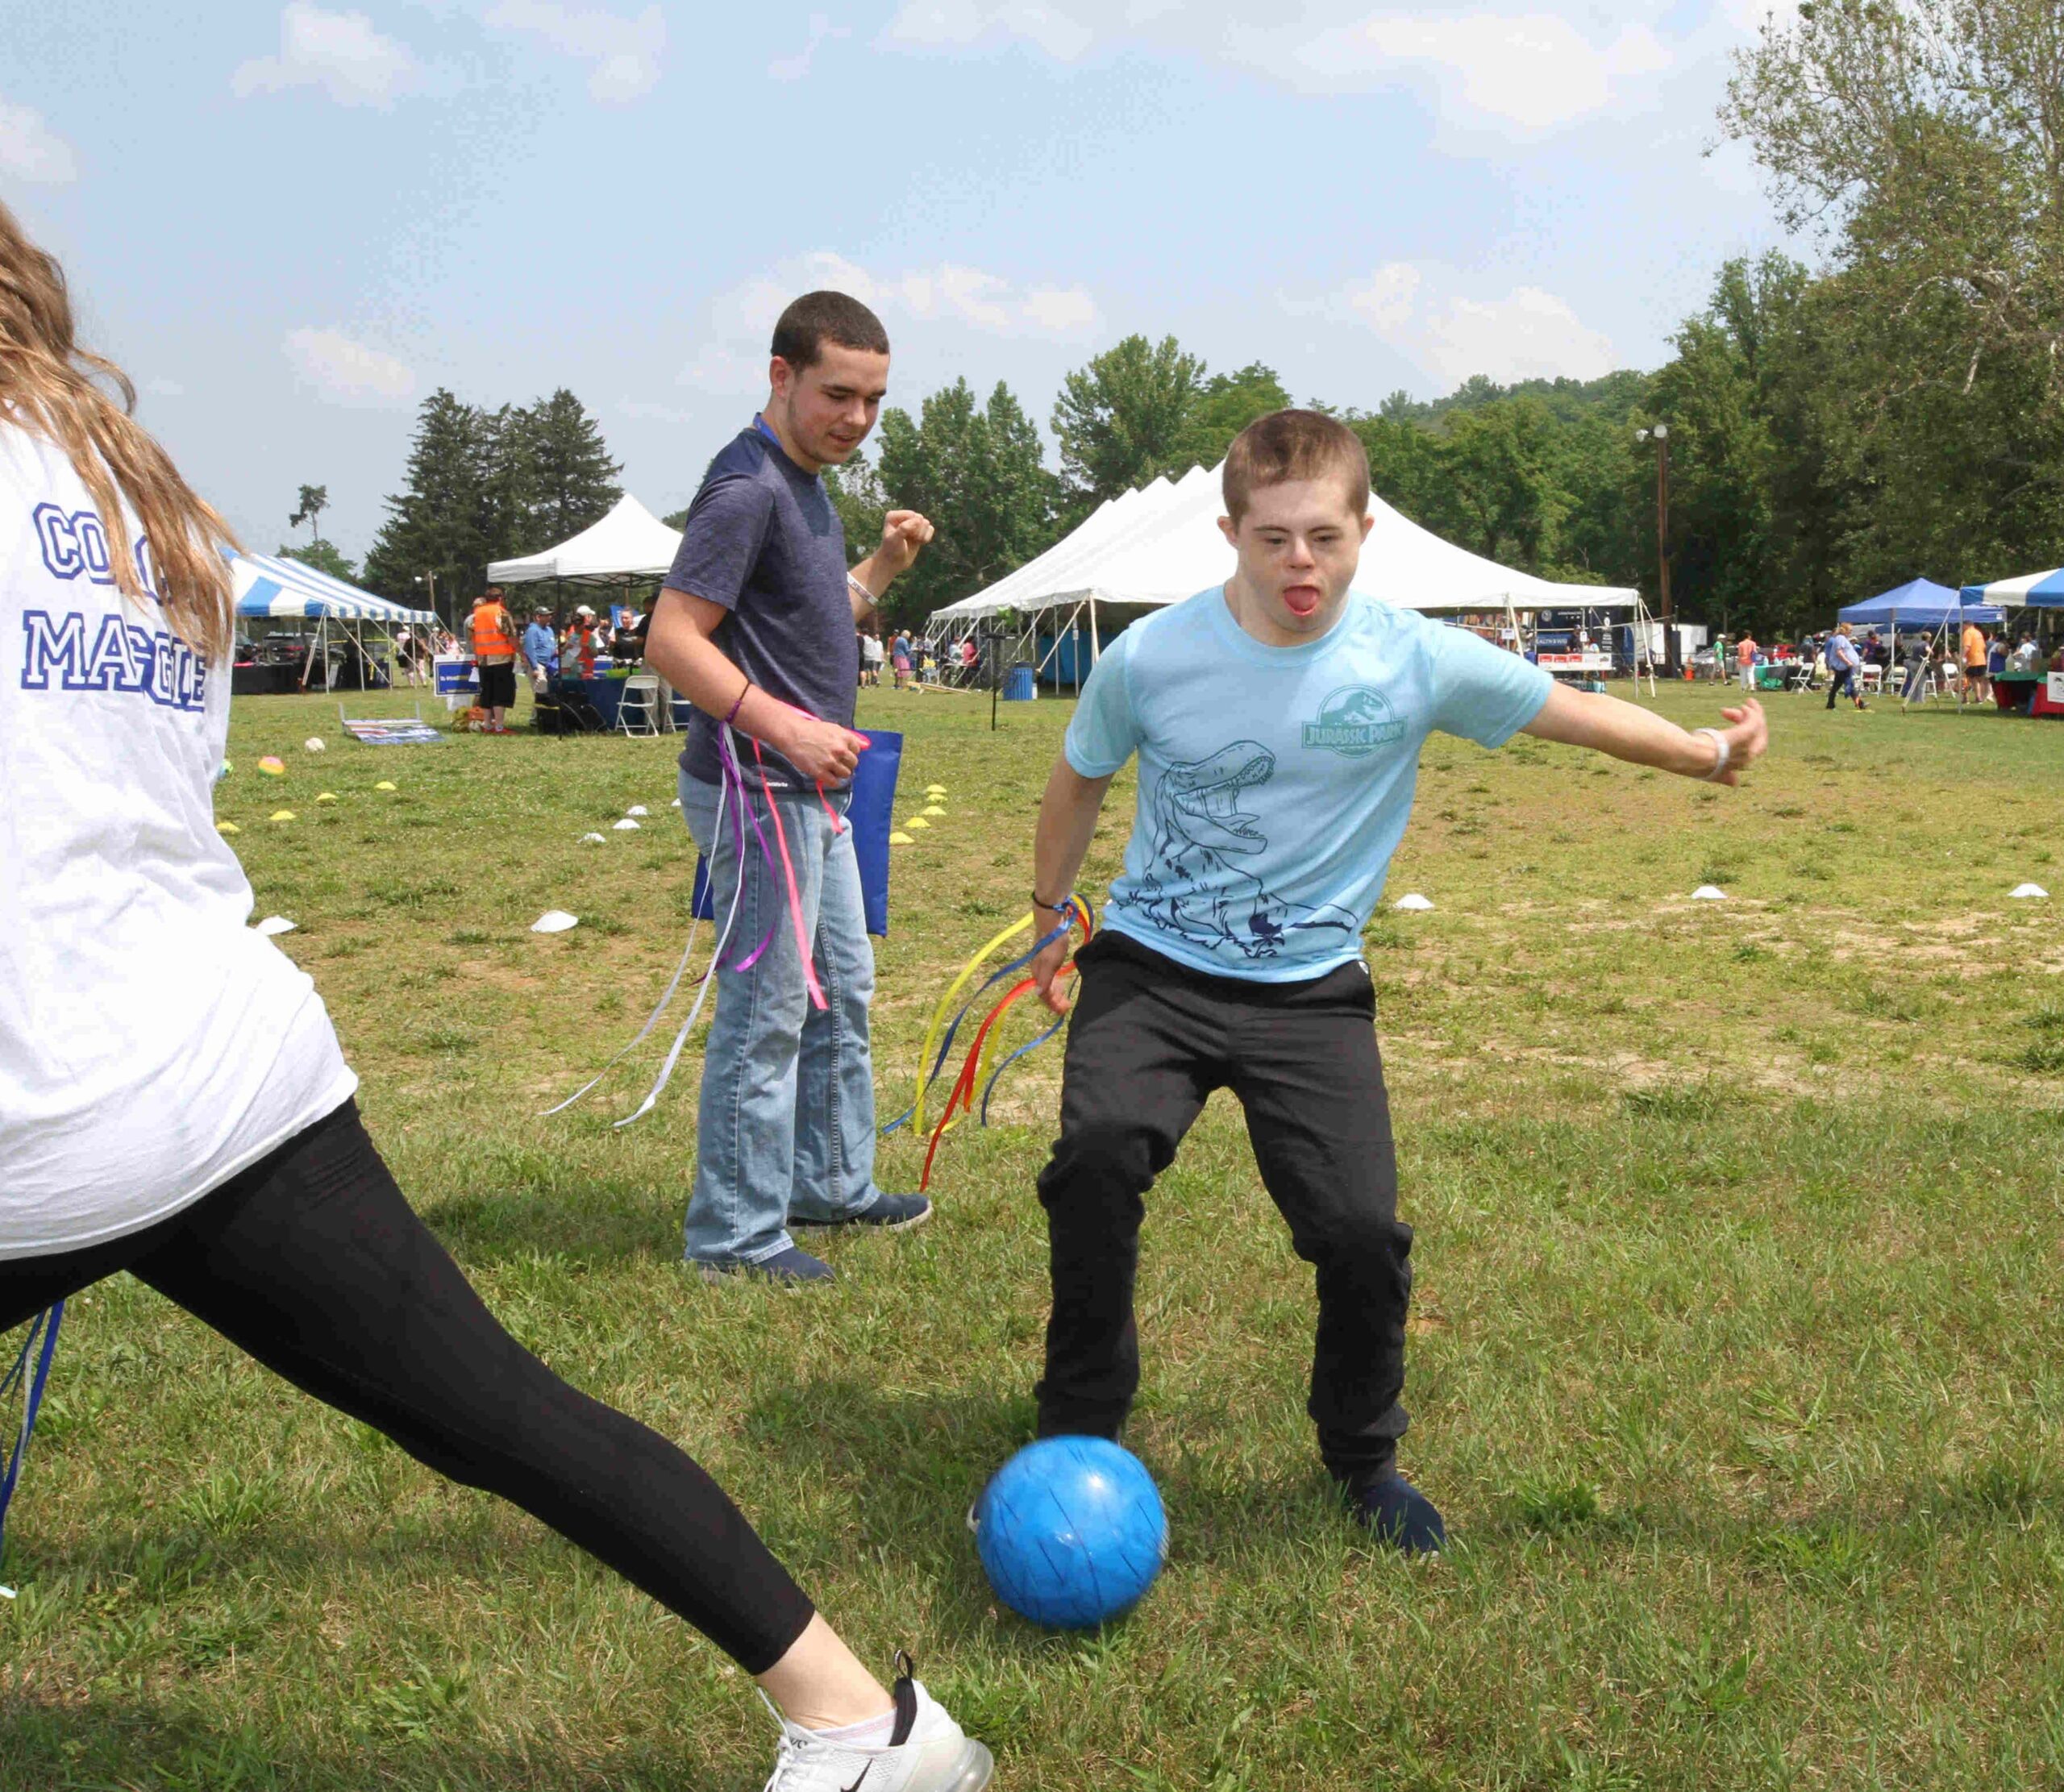 2 young people play soccer with Coach Maggie (who’s back is to us in the picture). Both of them are wearing colorful ribbons around their wrists, another activity that was found at the 3rd Annual ThinkDIFFERENTLY Fitness & Field Day on Friday June 29, 2023 at Bowdoin Park.